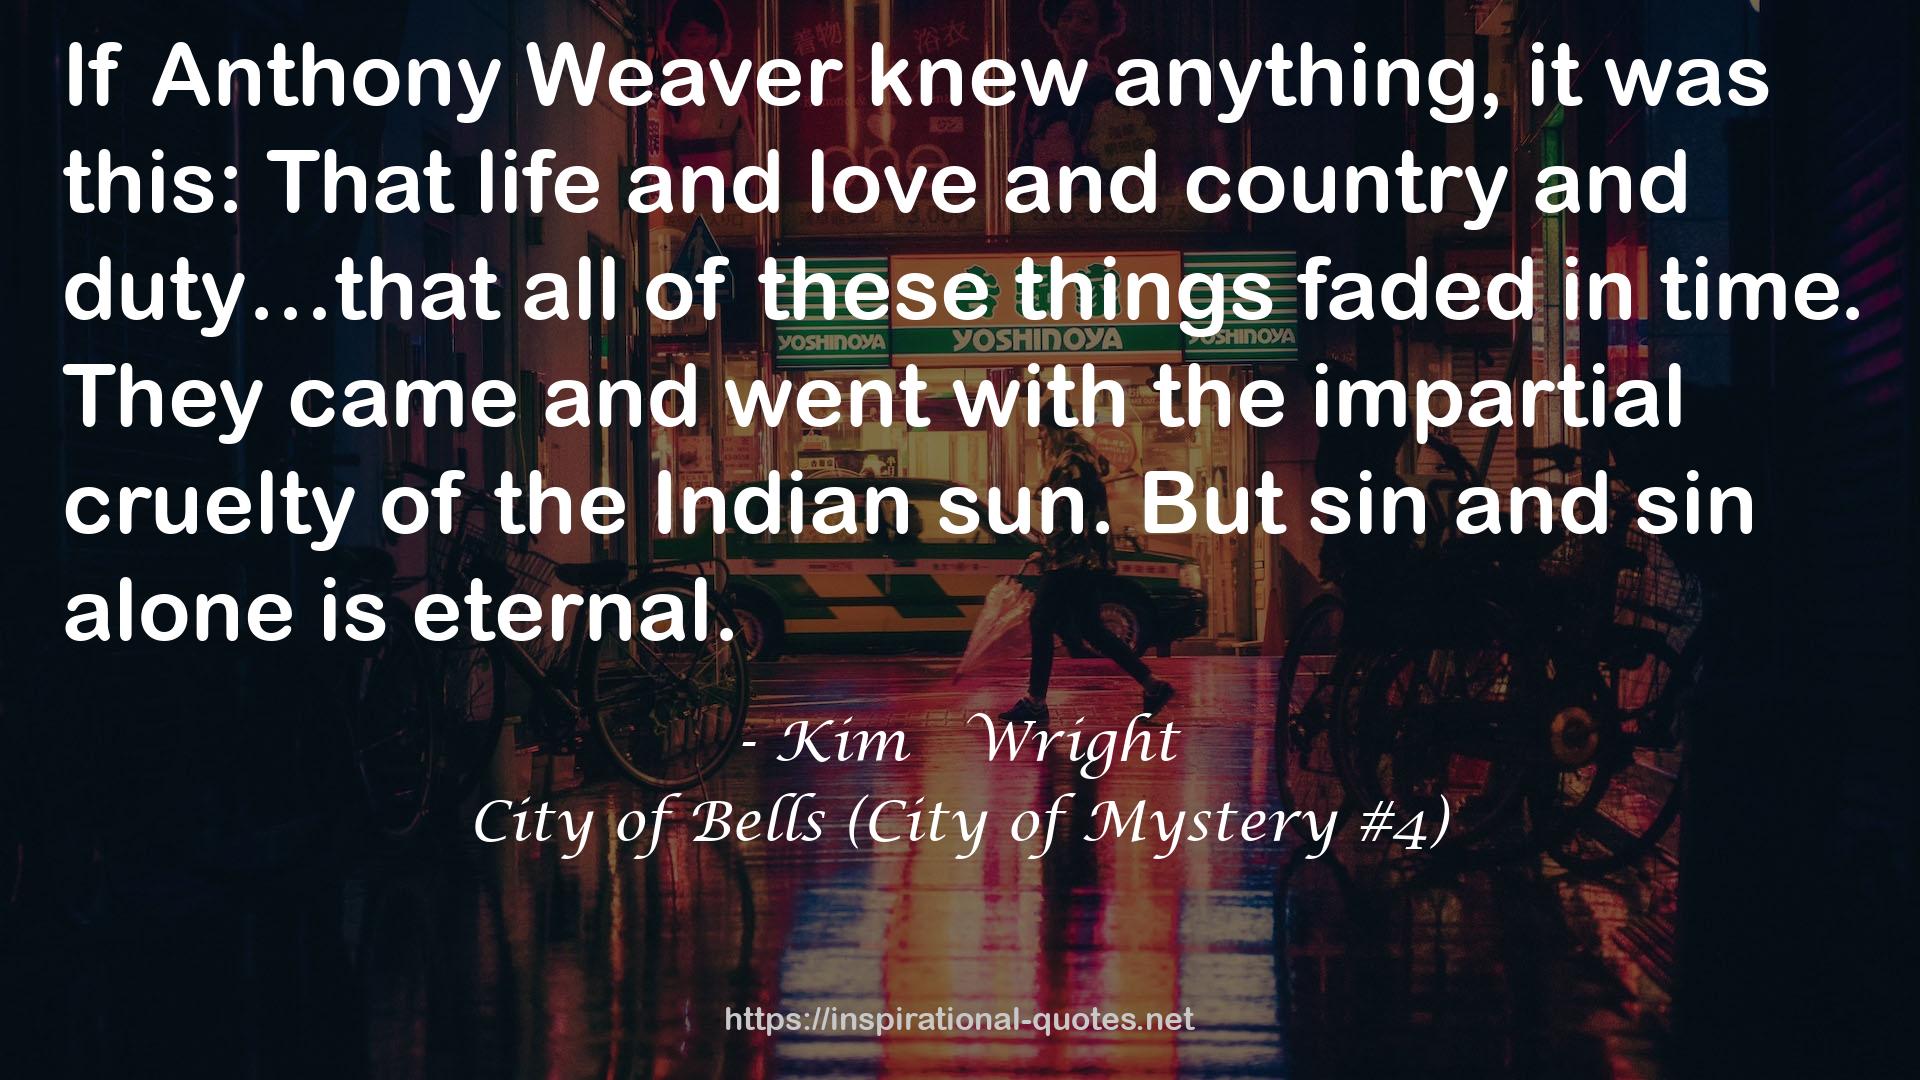 City of Bells (City of Mystery #4) QUOTES